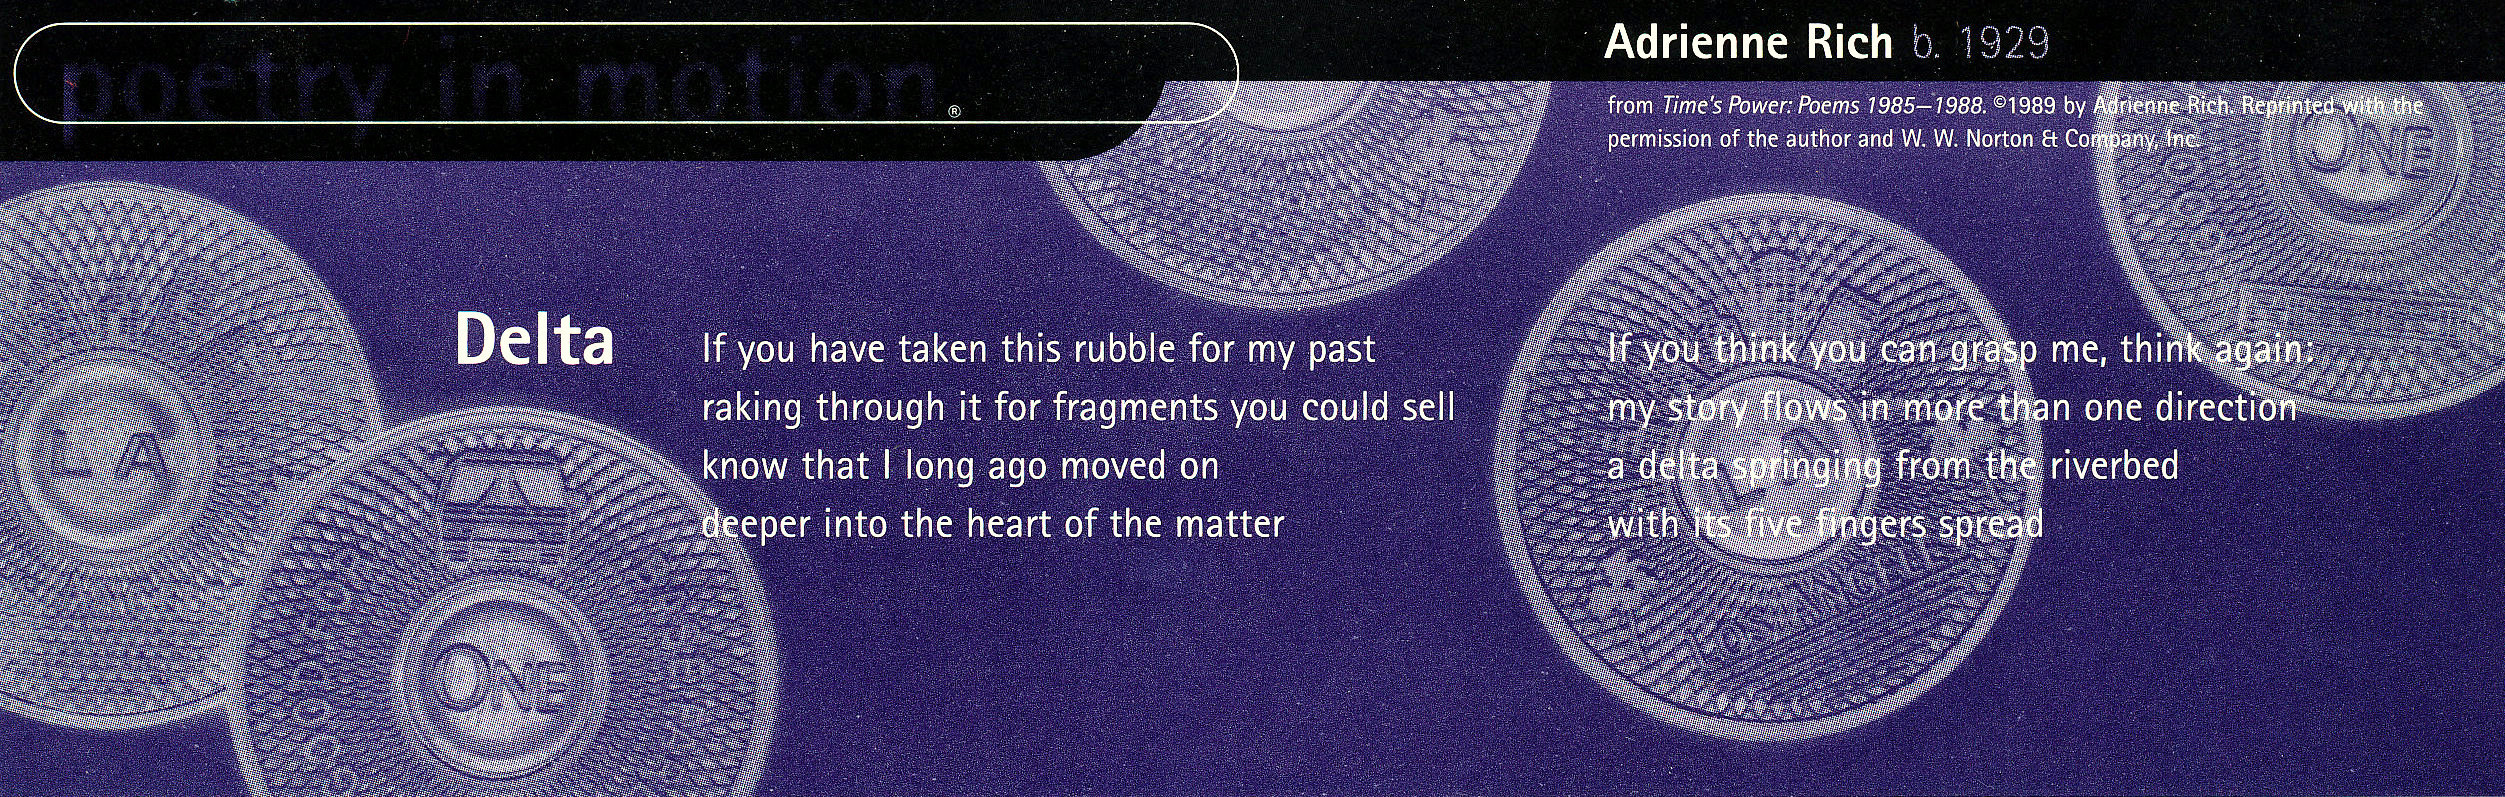 A vertical purple poster decorated with Los Angeles transit tokens features a poem titled Delta, by Adrienne Rich.